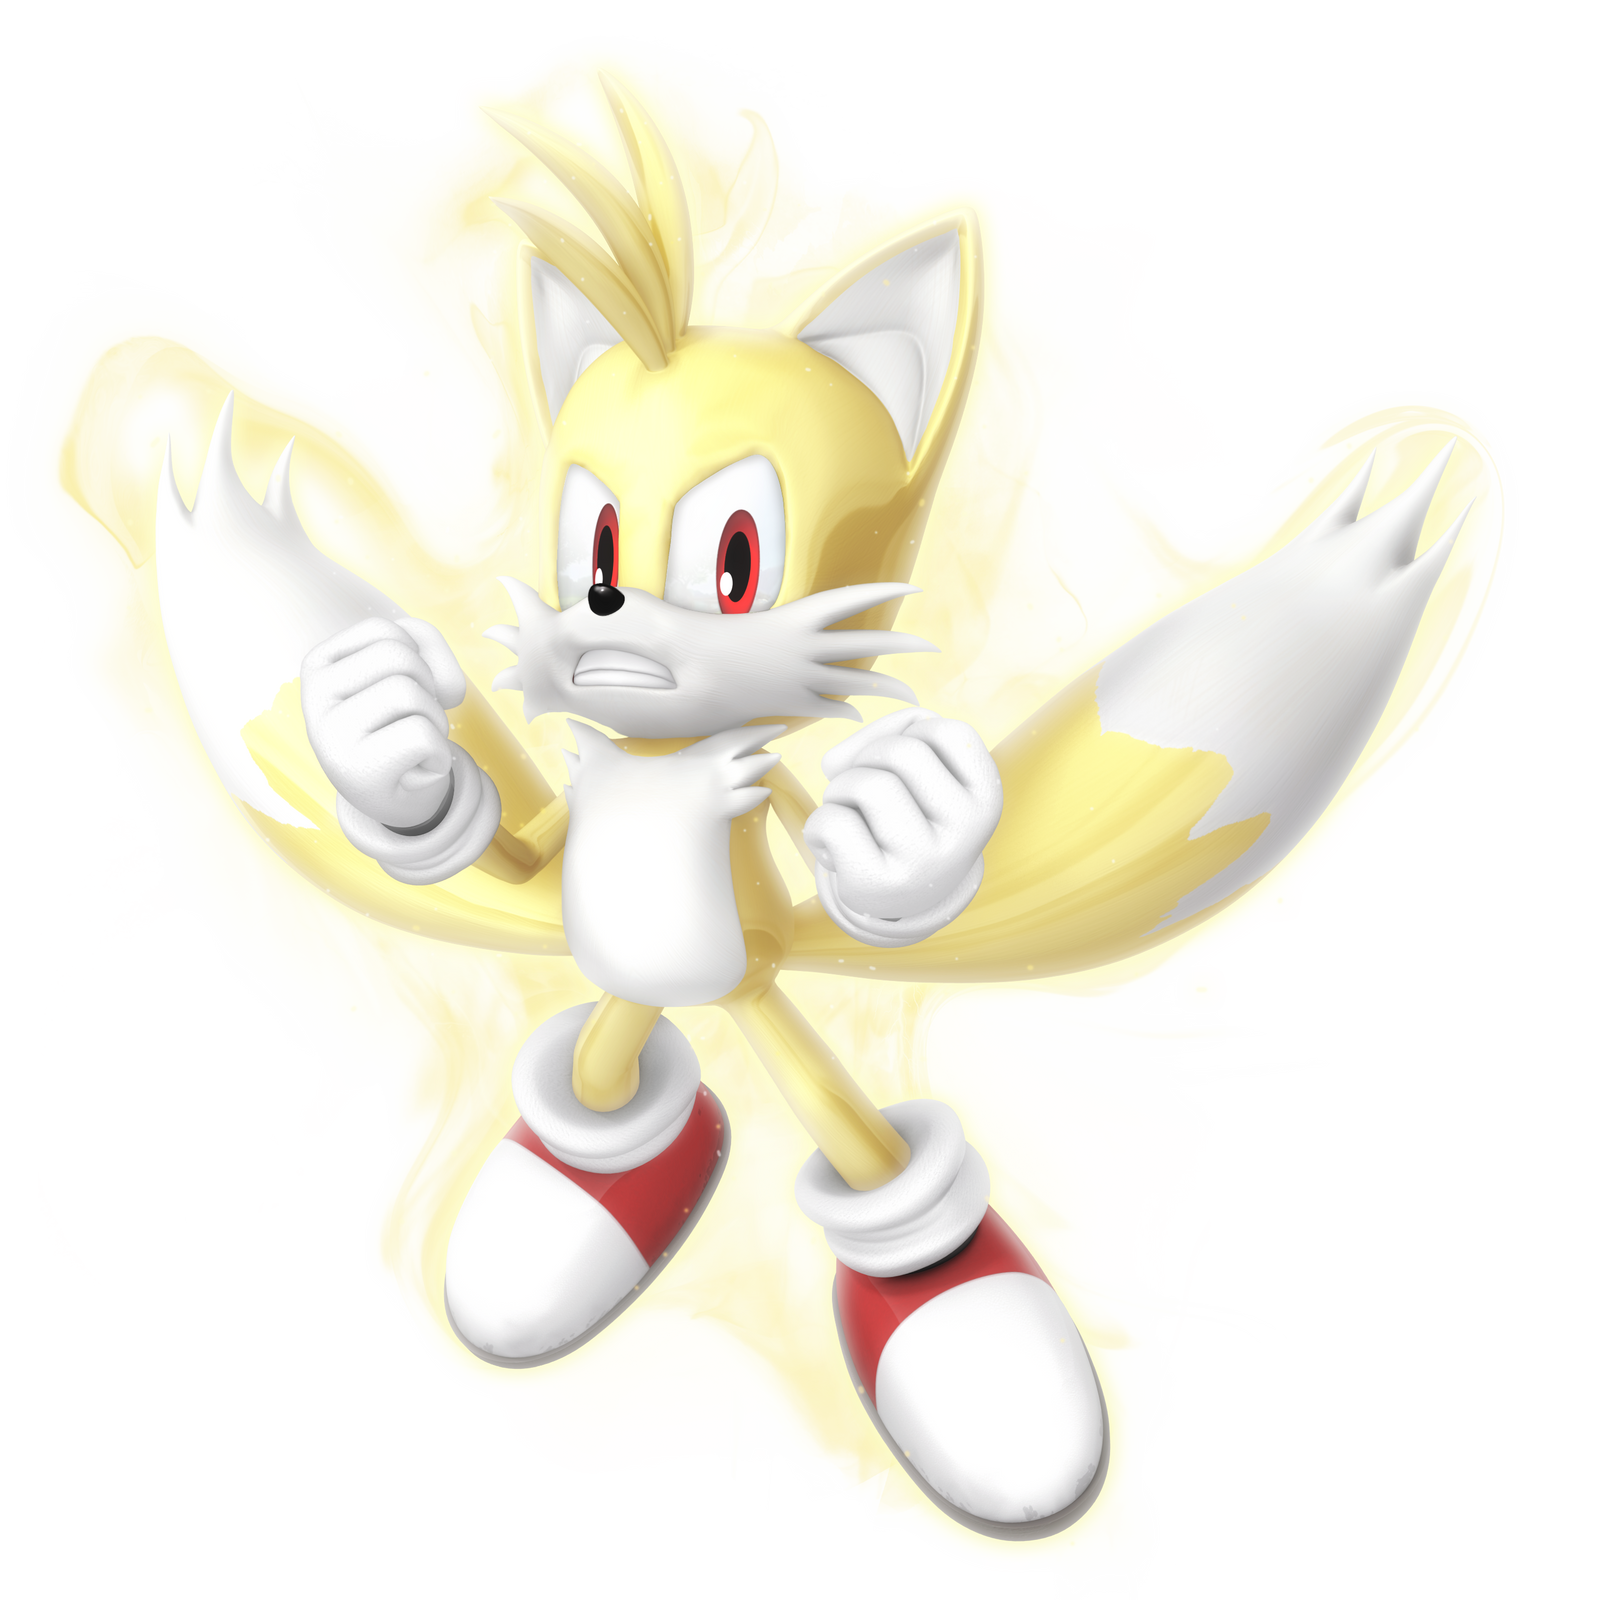 legacy_super_tails_render_by_nibroc_rock_db2zw33-fullview.png